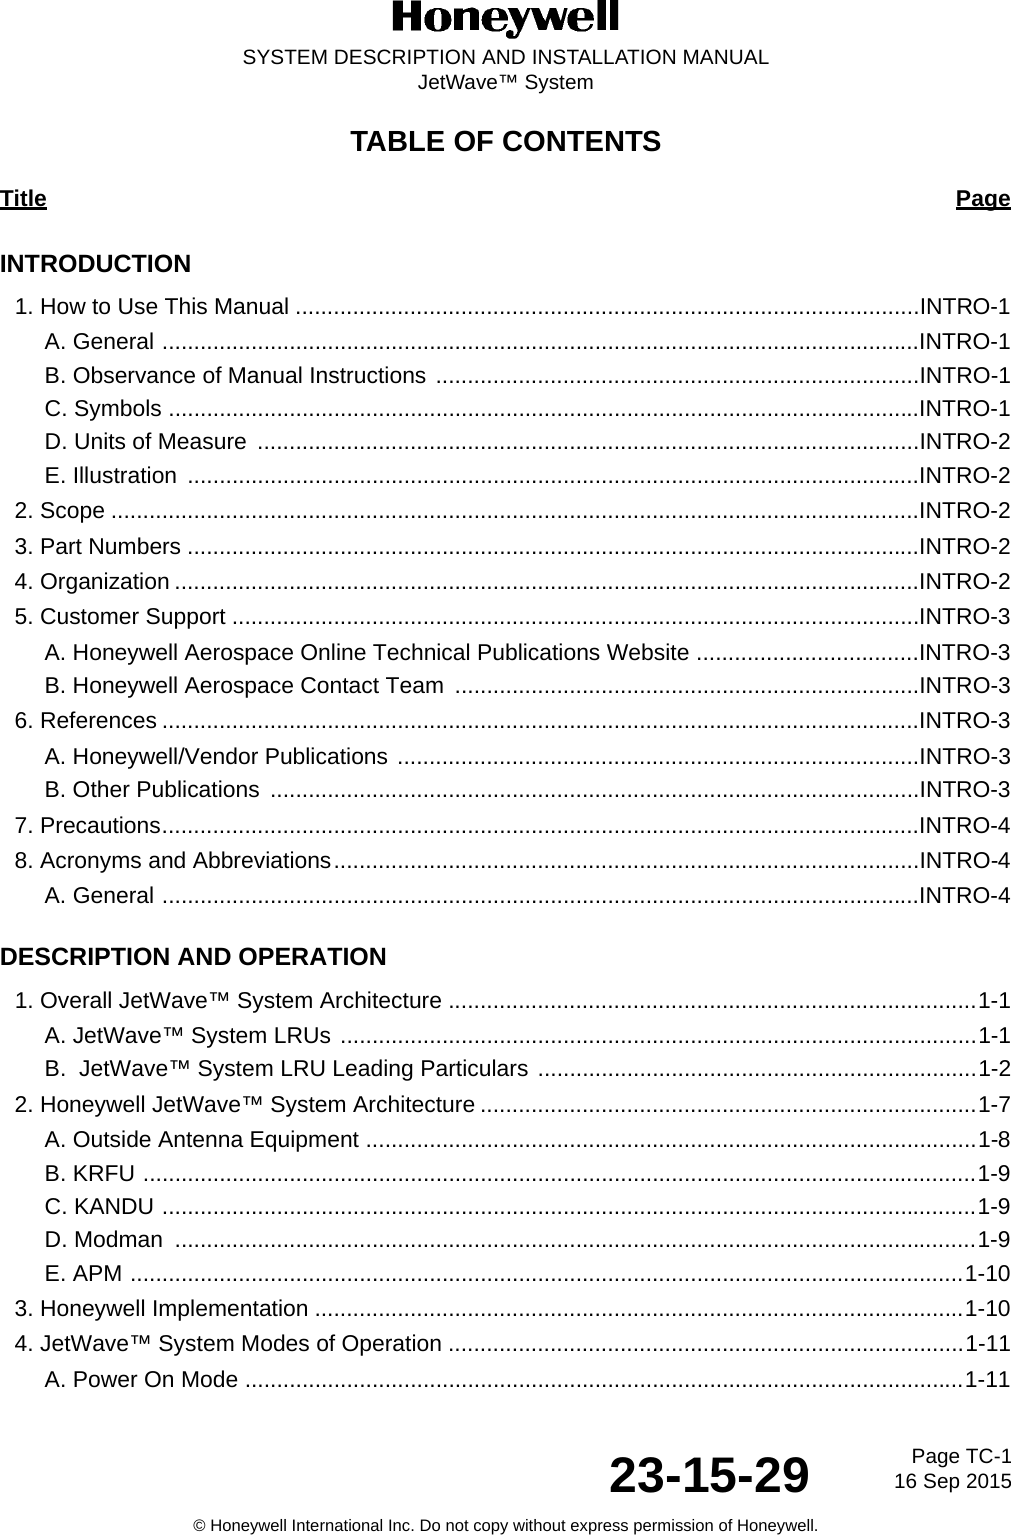 Page TC-1 16 Sep 201523-15-29SYSTEM DESCRIPTION AND INSTALLATION MANUALJetWave™ System© Honeywell International Inc. Do not copy without express permission of Honeywell.TABLE OF CONTENTS Title PageINTRODUCTION1. How to Use This Manual ..................................................................................................INTRO-1A. General .......................................................................................................................INTRO-1B. Observance of Manual Instructions ............................................................................INTRO-1C. Symbols ......................................................................................................................INTRO-1D. Units of Measure  ........................................................................................................INTRO-2E. Illustration  ...................................................................................................................INTRO-22. Scope ...............................................................................................................................INTRO-23. Part Numbers ...................................................................................................................INTRO-24. Organization .....................................................................................................................INTRO-25. Customer Support ............................................................................................................INTRO-3A. Honeywell Aerospace Online Technical Publications Website ...................................INTRO-3B. Honeywell Aerospace Contact Team  .........................................................................INTRO-36. References .......................................................................................................................INTRO-3A. Honeywell/Vendor Publications ..................................................................................INTRO-3B. Other Publications  ......................................................................................................INTRO-37. Precautions.......................................................................................................................INTRO-48. Acronyms and Abbreviations............................................................................................INTRO-4A. General .......................................................................................................................INTRO-4DESCRIPTION AND OPERATION1. Overall JetWave™ System Architecture ...................................................................................1-1A. JetWave™ System LRUs ....................................................................................................1-1B.  JetWave™ System LRU Leading Particulars .....................................................................1-22. Honeywell JetWave™ System Architecture ..............................................................................1-7A. Outside Antenna Equipment ................................................................................................1-8B. KRFU ...................................................................................................................................1-9C. KANDU ................................................................................................................................1-9D. Modman  ..............................................................................................................................1-9E. APM ...................................................................................................................................1-103. Honeywell Implementation ......................................................................................................1-104. JetWave™ System Modes of Operation .................................................................................1-11A. Power On Mode .................................................................................................................1-11